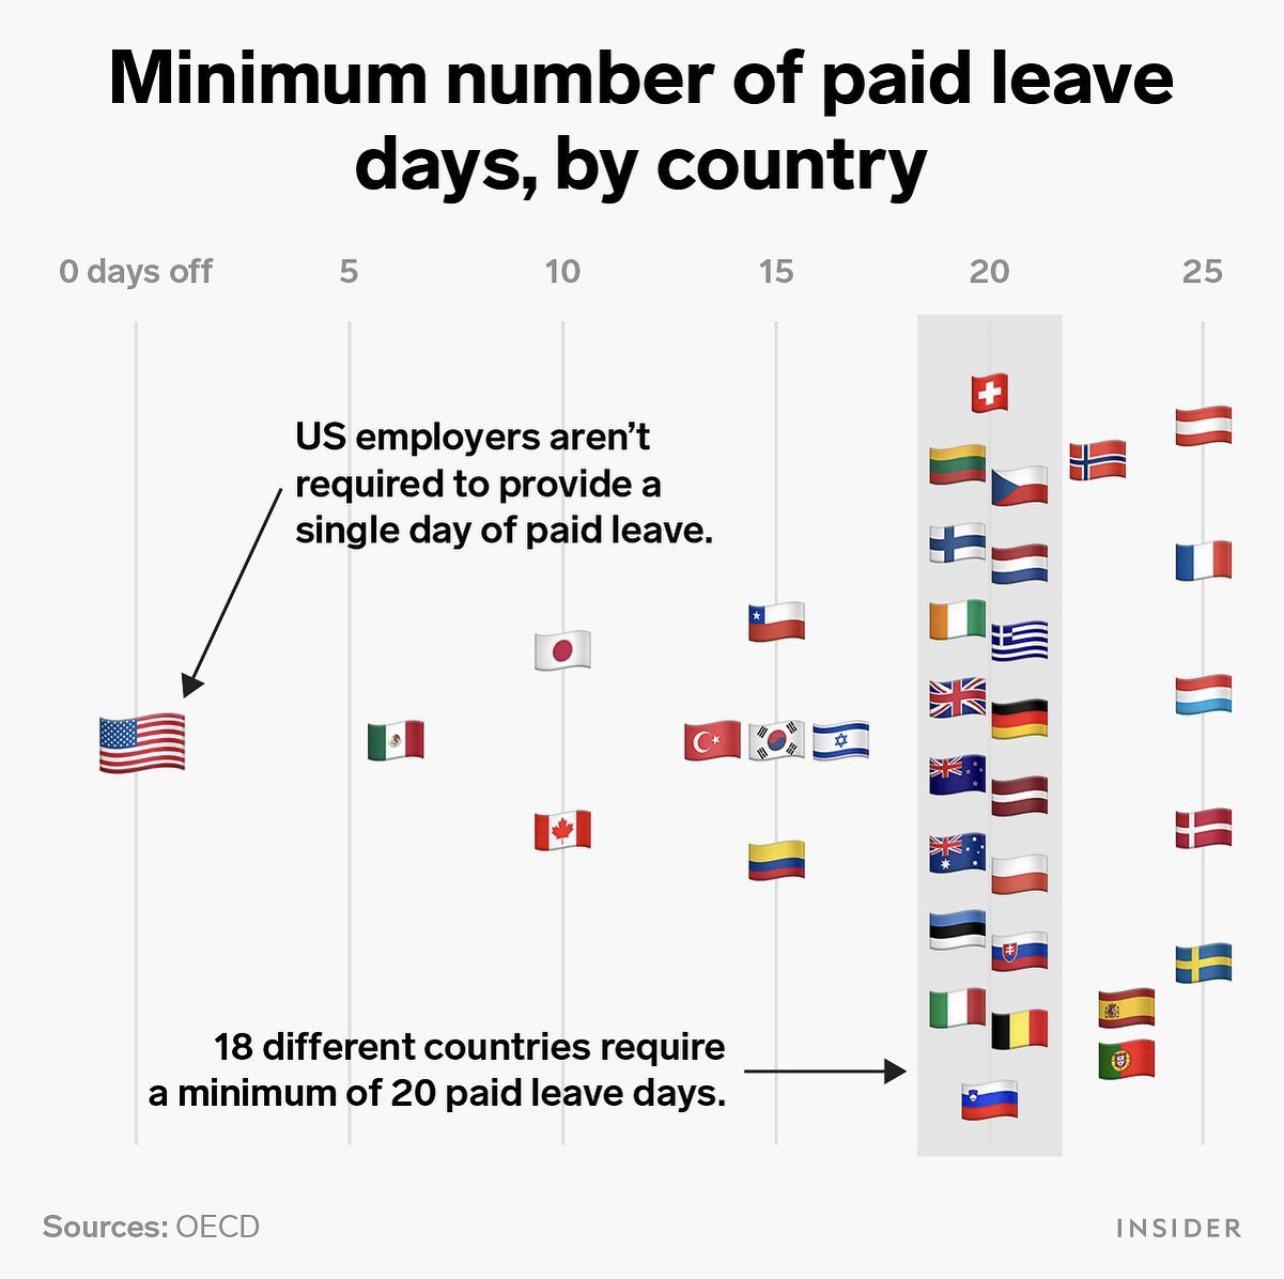 european regional development fund - Minimum number of paid leave days, by country O days off 5 10 15 20 25 Us employers aren't required to provide a single day of paid leave. 4 18 different countries require a minimum of 20 paid leave days. Sources Oecd 